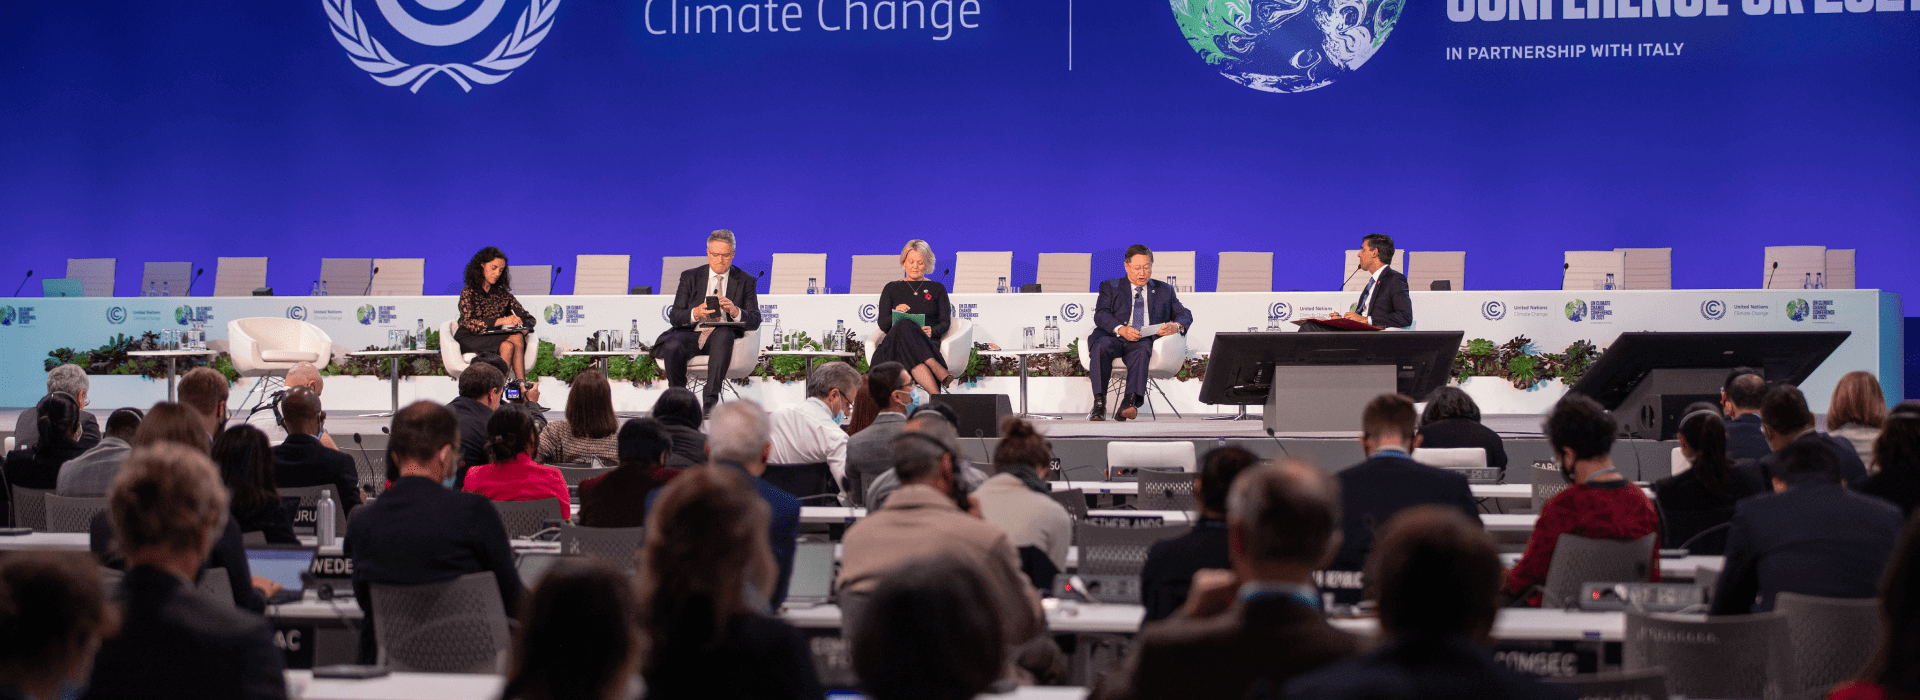 Understanding the climate impacts of new pledges made at COP26